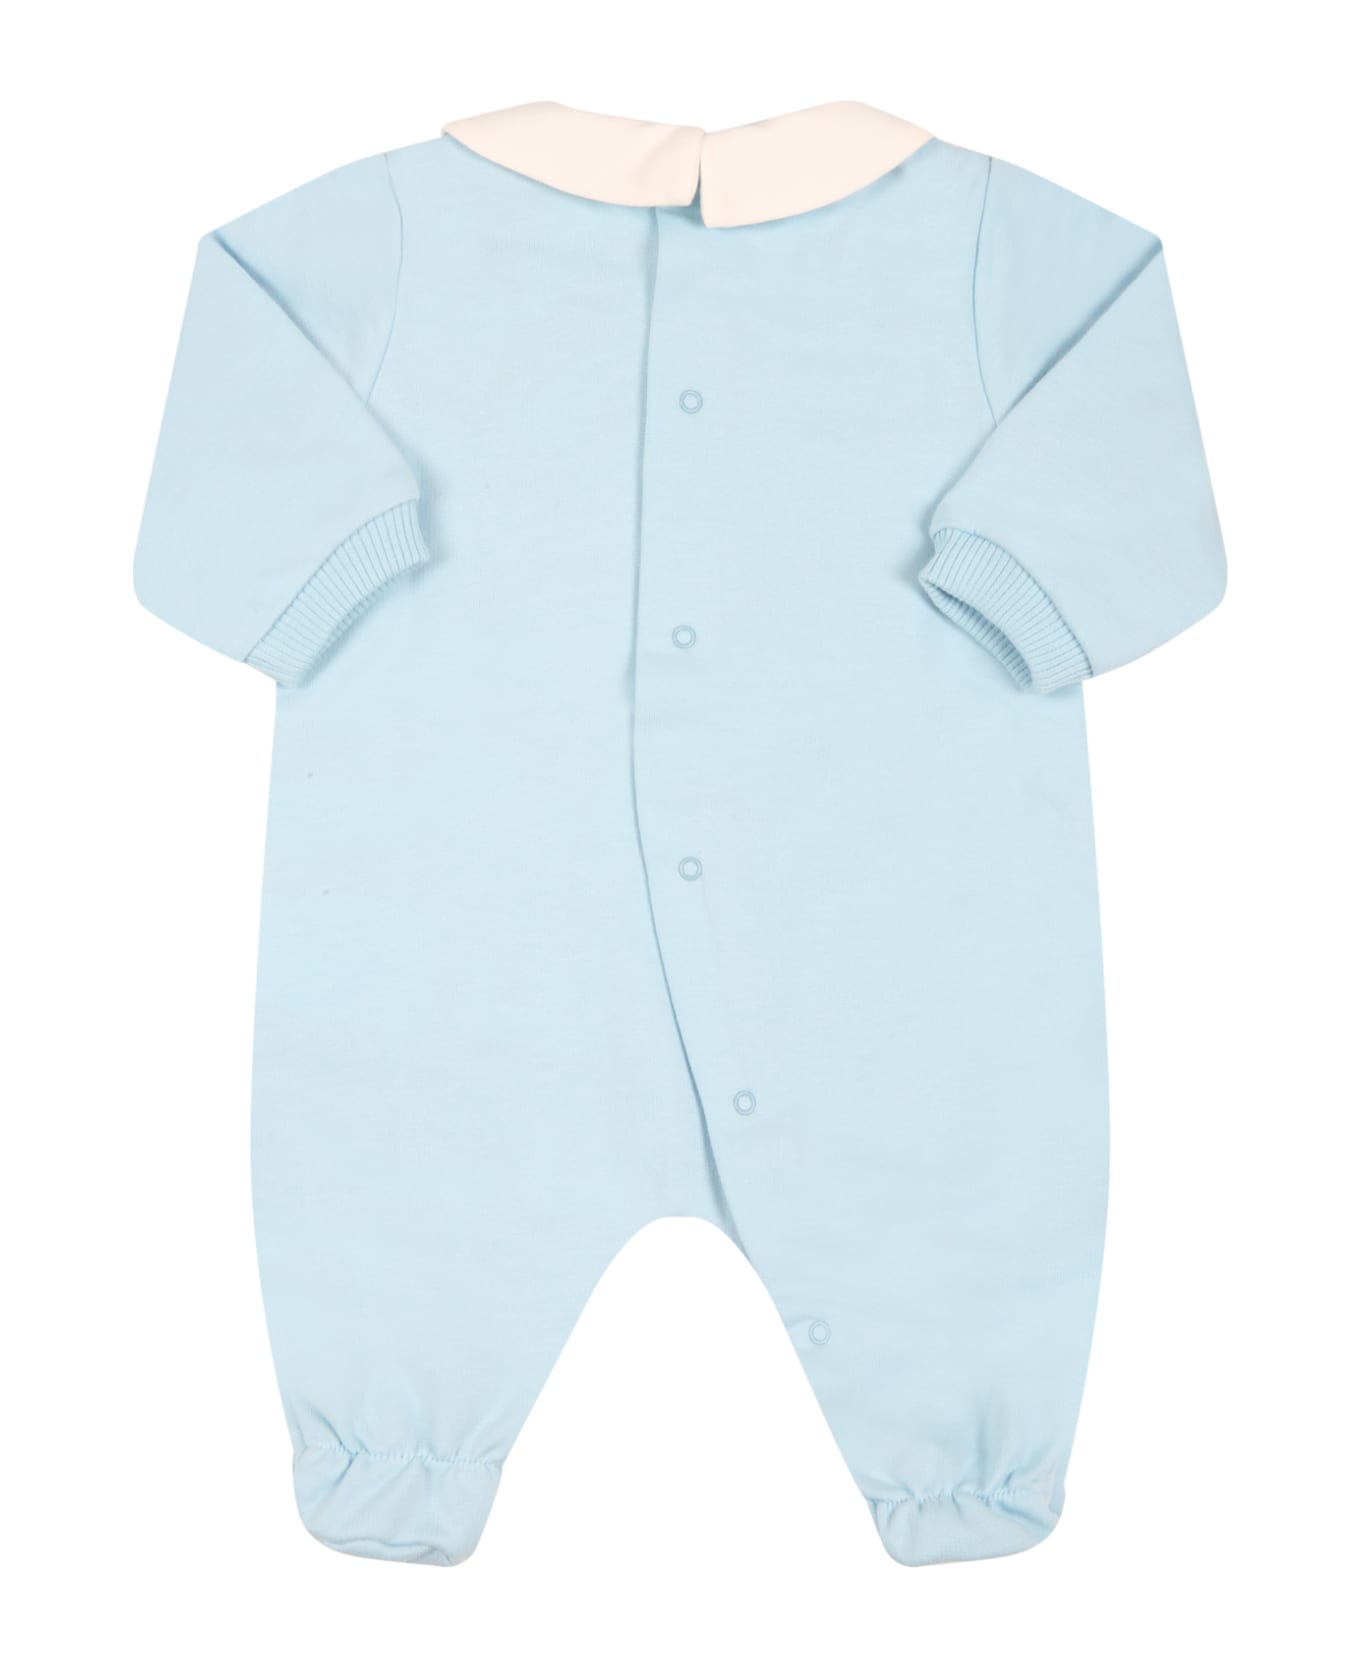 Moschino Multicolor Set For Baby Boy With Teddy Bears - Light Blue